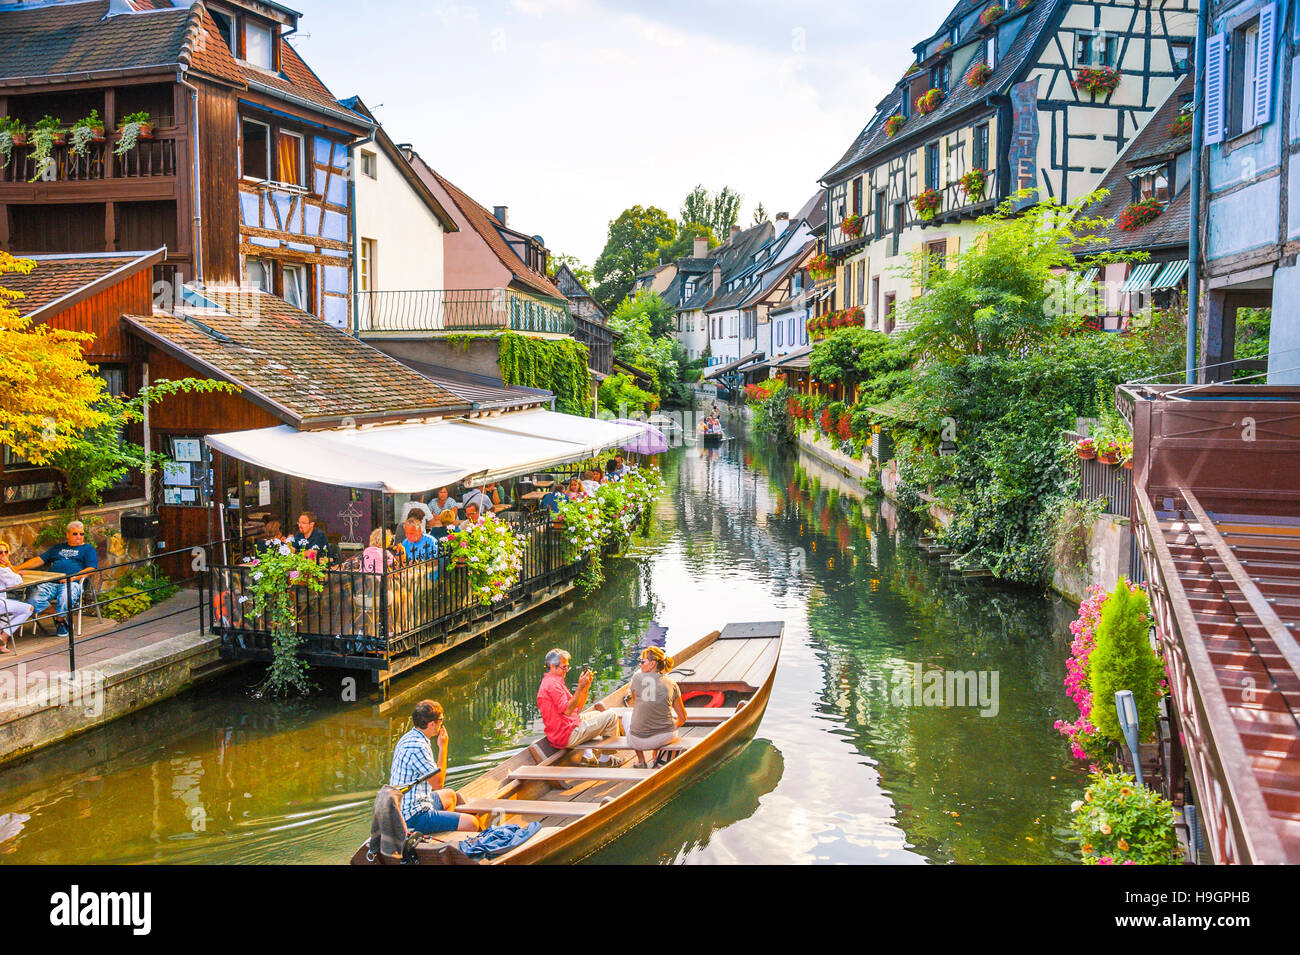 Colmar, part of old town called small Venice scenic picturesque town, Alsace, France Stock Photo